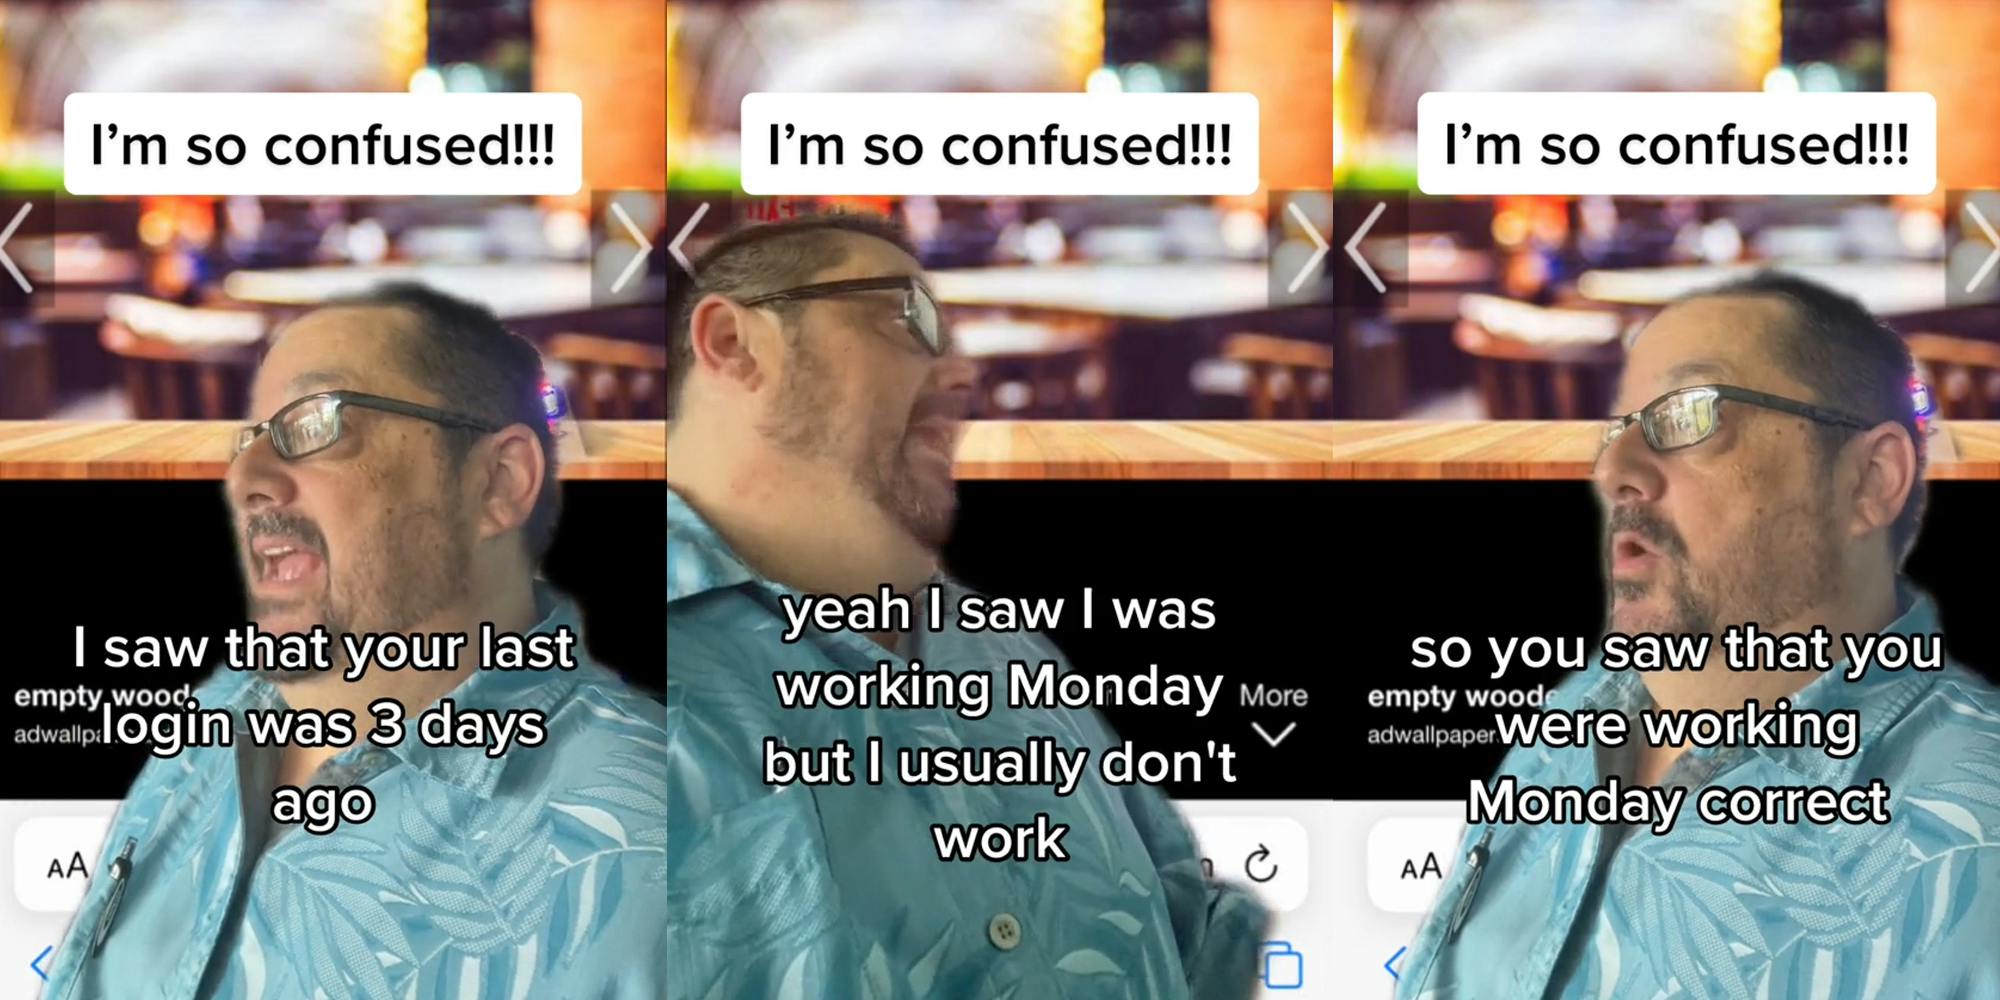 boss greenscreen TikTok with caption "I'm so confused!!!" "I saw that your last login was 3 days ago" (l) boss greenscreen TikTok with caption "I'm so confused!!!" "yeah I saw I was working Monday but I usually don't work" (c) boss greenscreen TikTok with caption "I'm so confused!!!" "so you saw tht you were working Monday correct" (r)